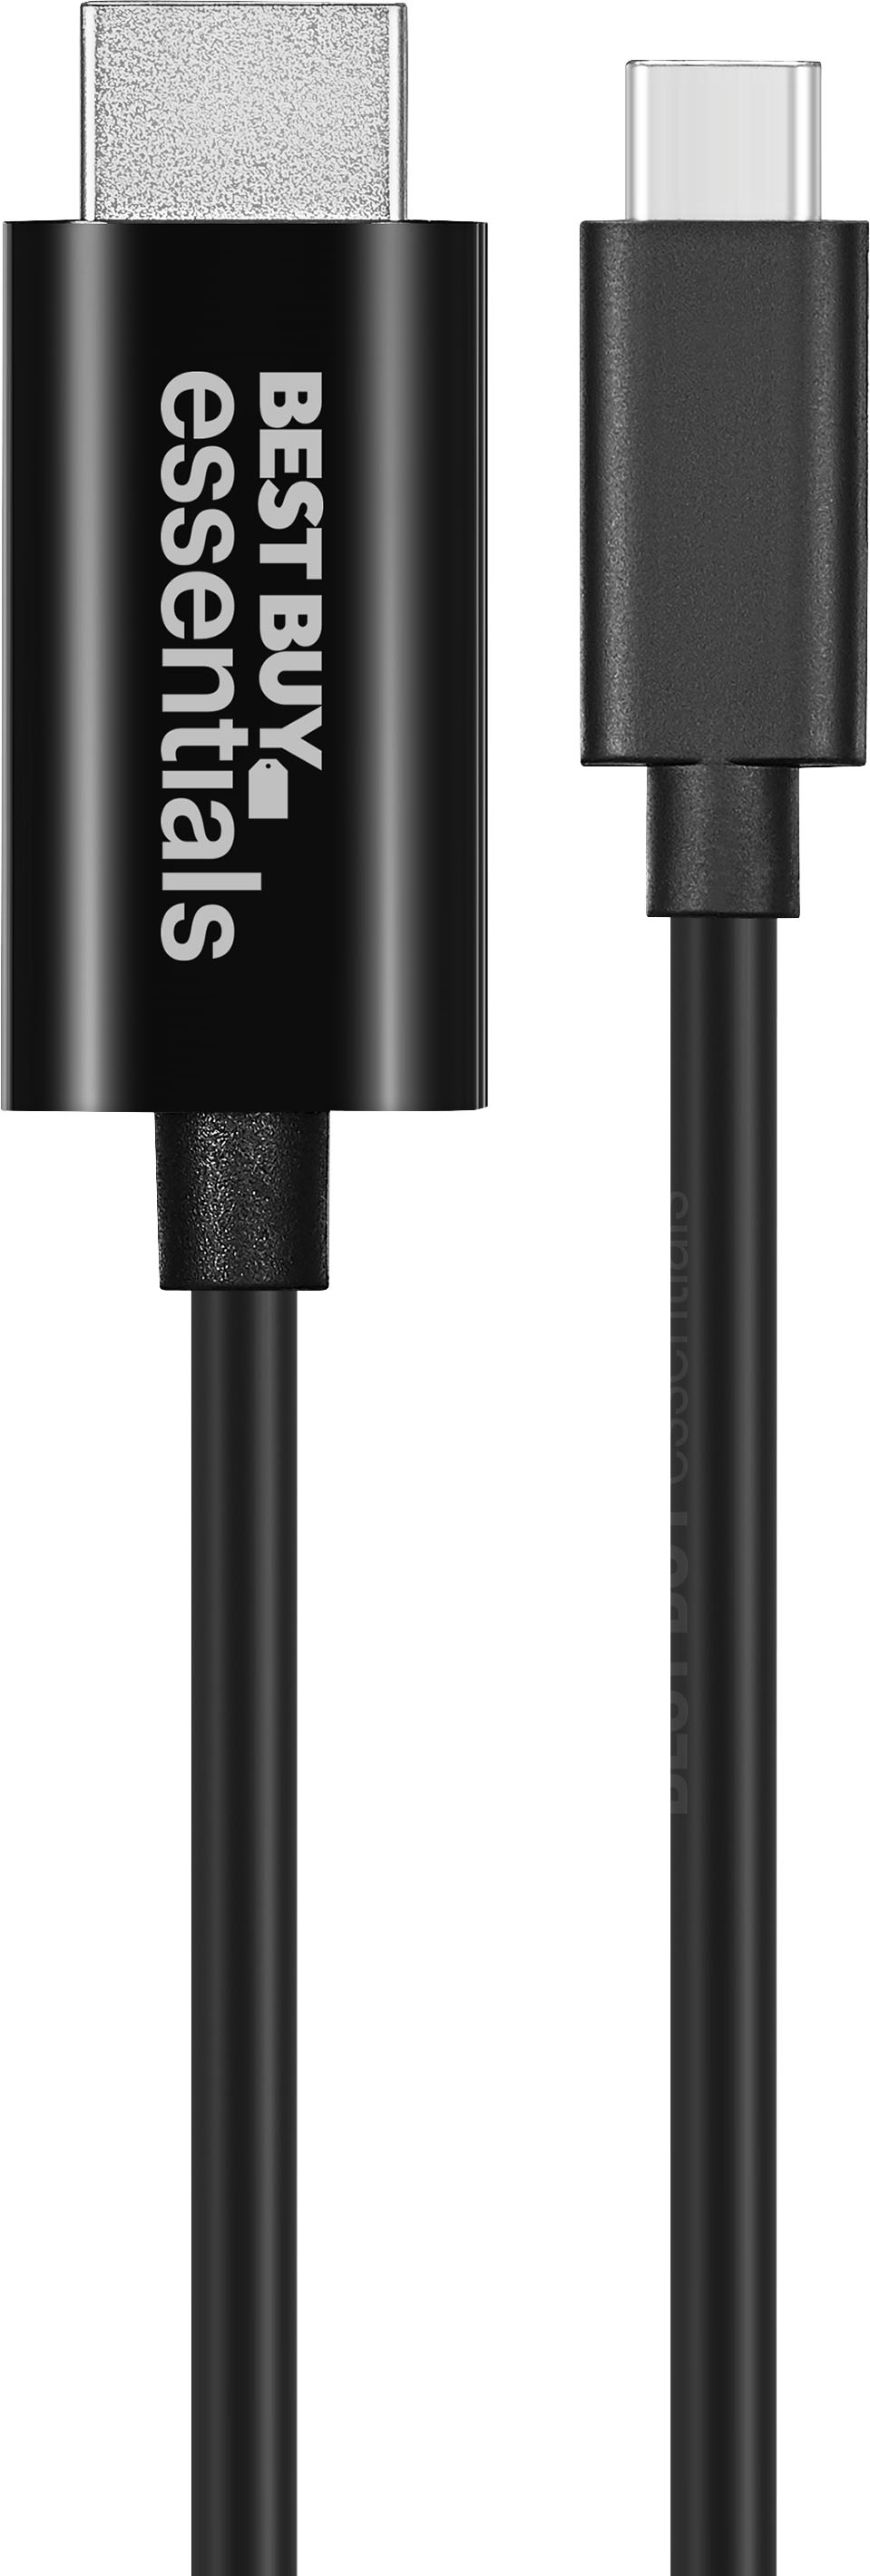 Best Buy Essentials 6 Usb C To Hdmi Cable Black Be Pc3chd6 Best Buy